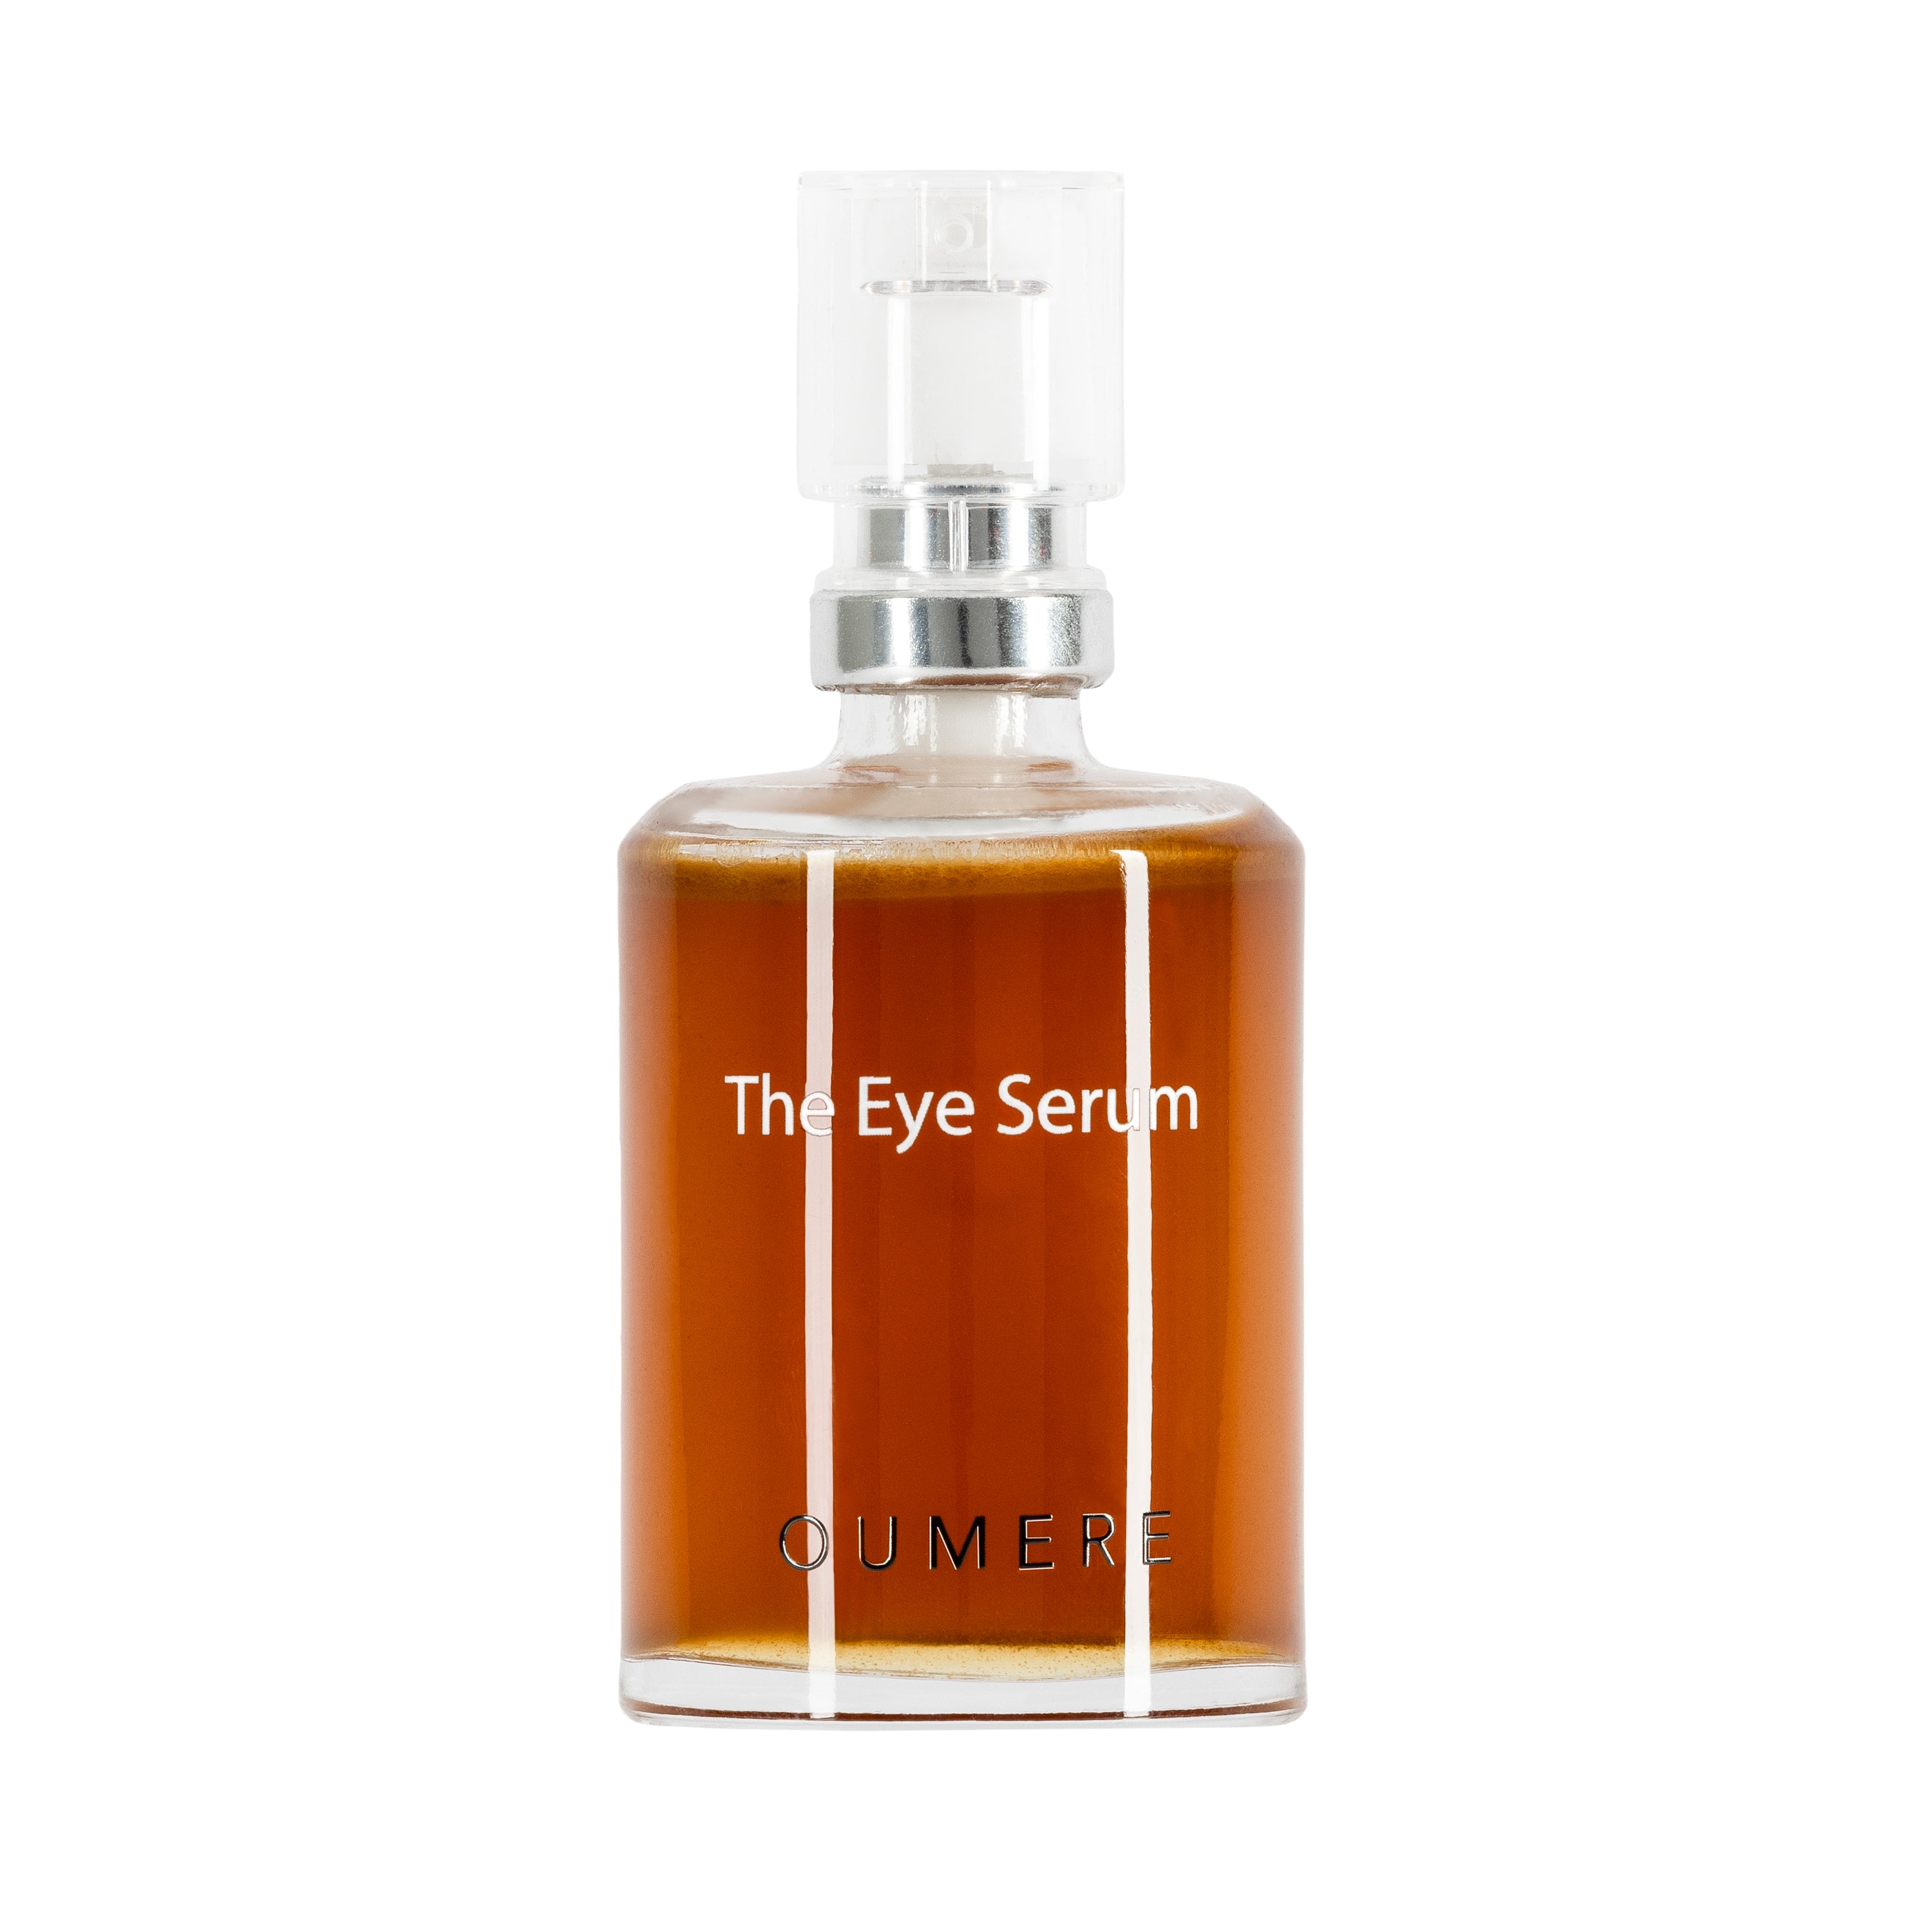 The Eye serum, glass bottle with dispensing pump